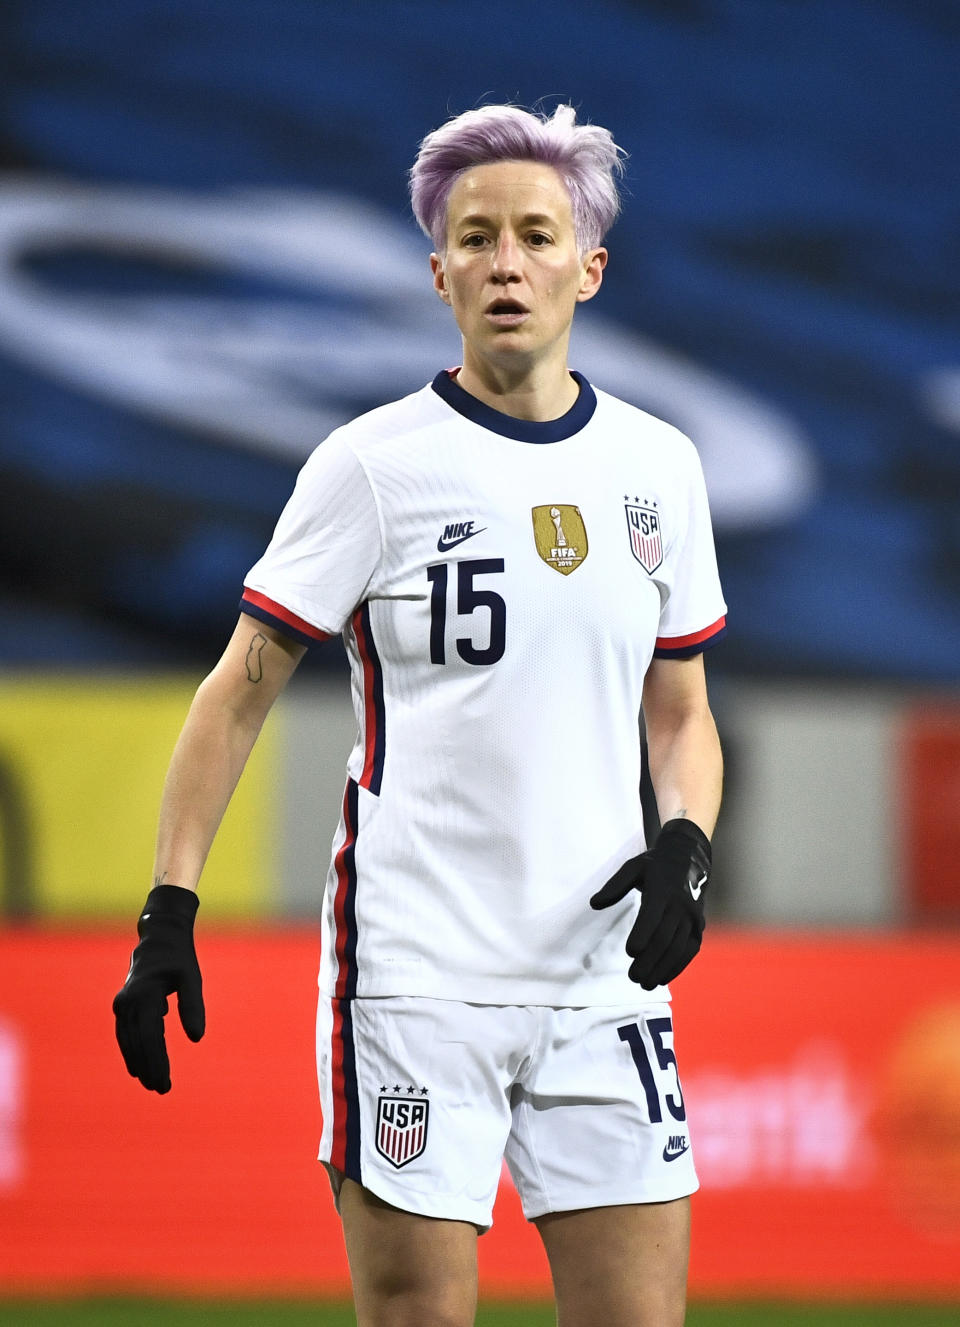 Megan Rapinoe of USA in action during the women's international friendly soccer match between Sweden and USA at Friends Arena in Stockholm, Sweden, Saturday, April 10, 2021. (Claudio Bresciani/TT via AP)